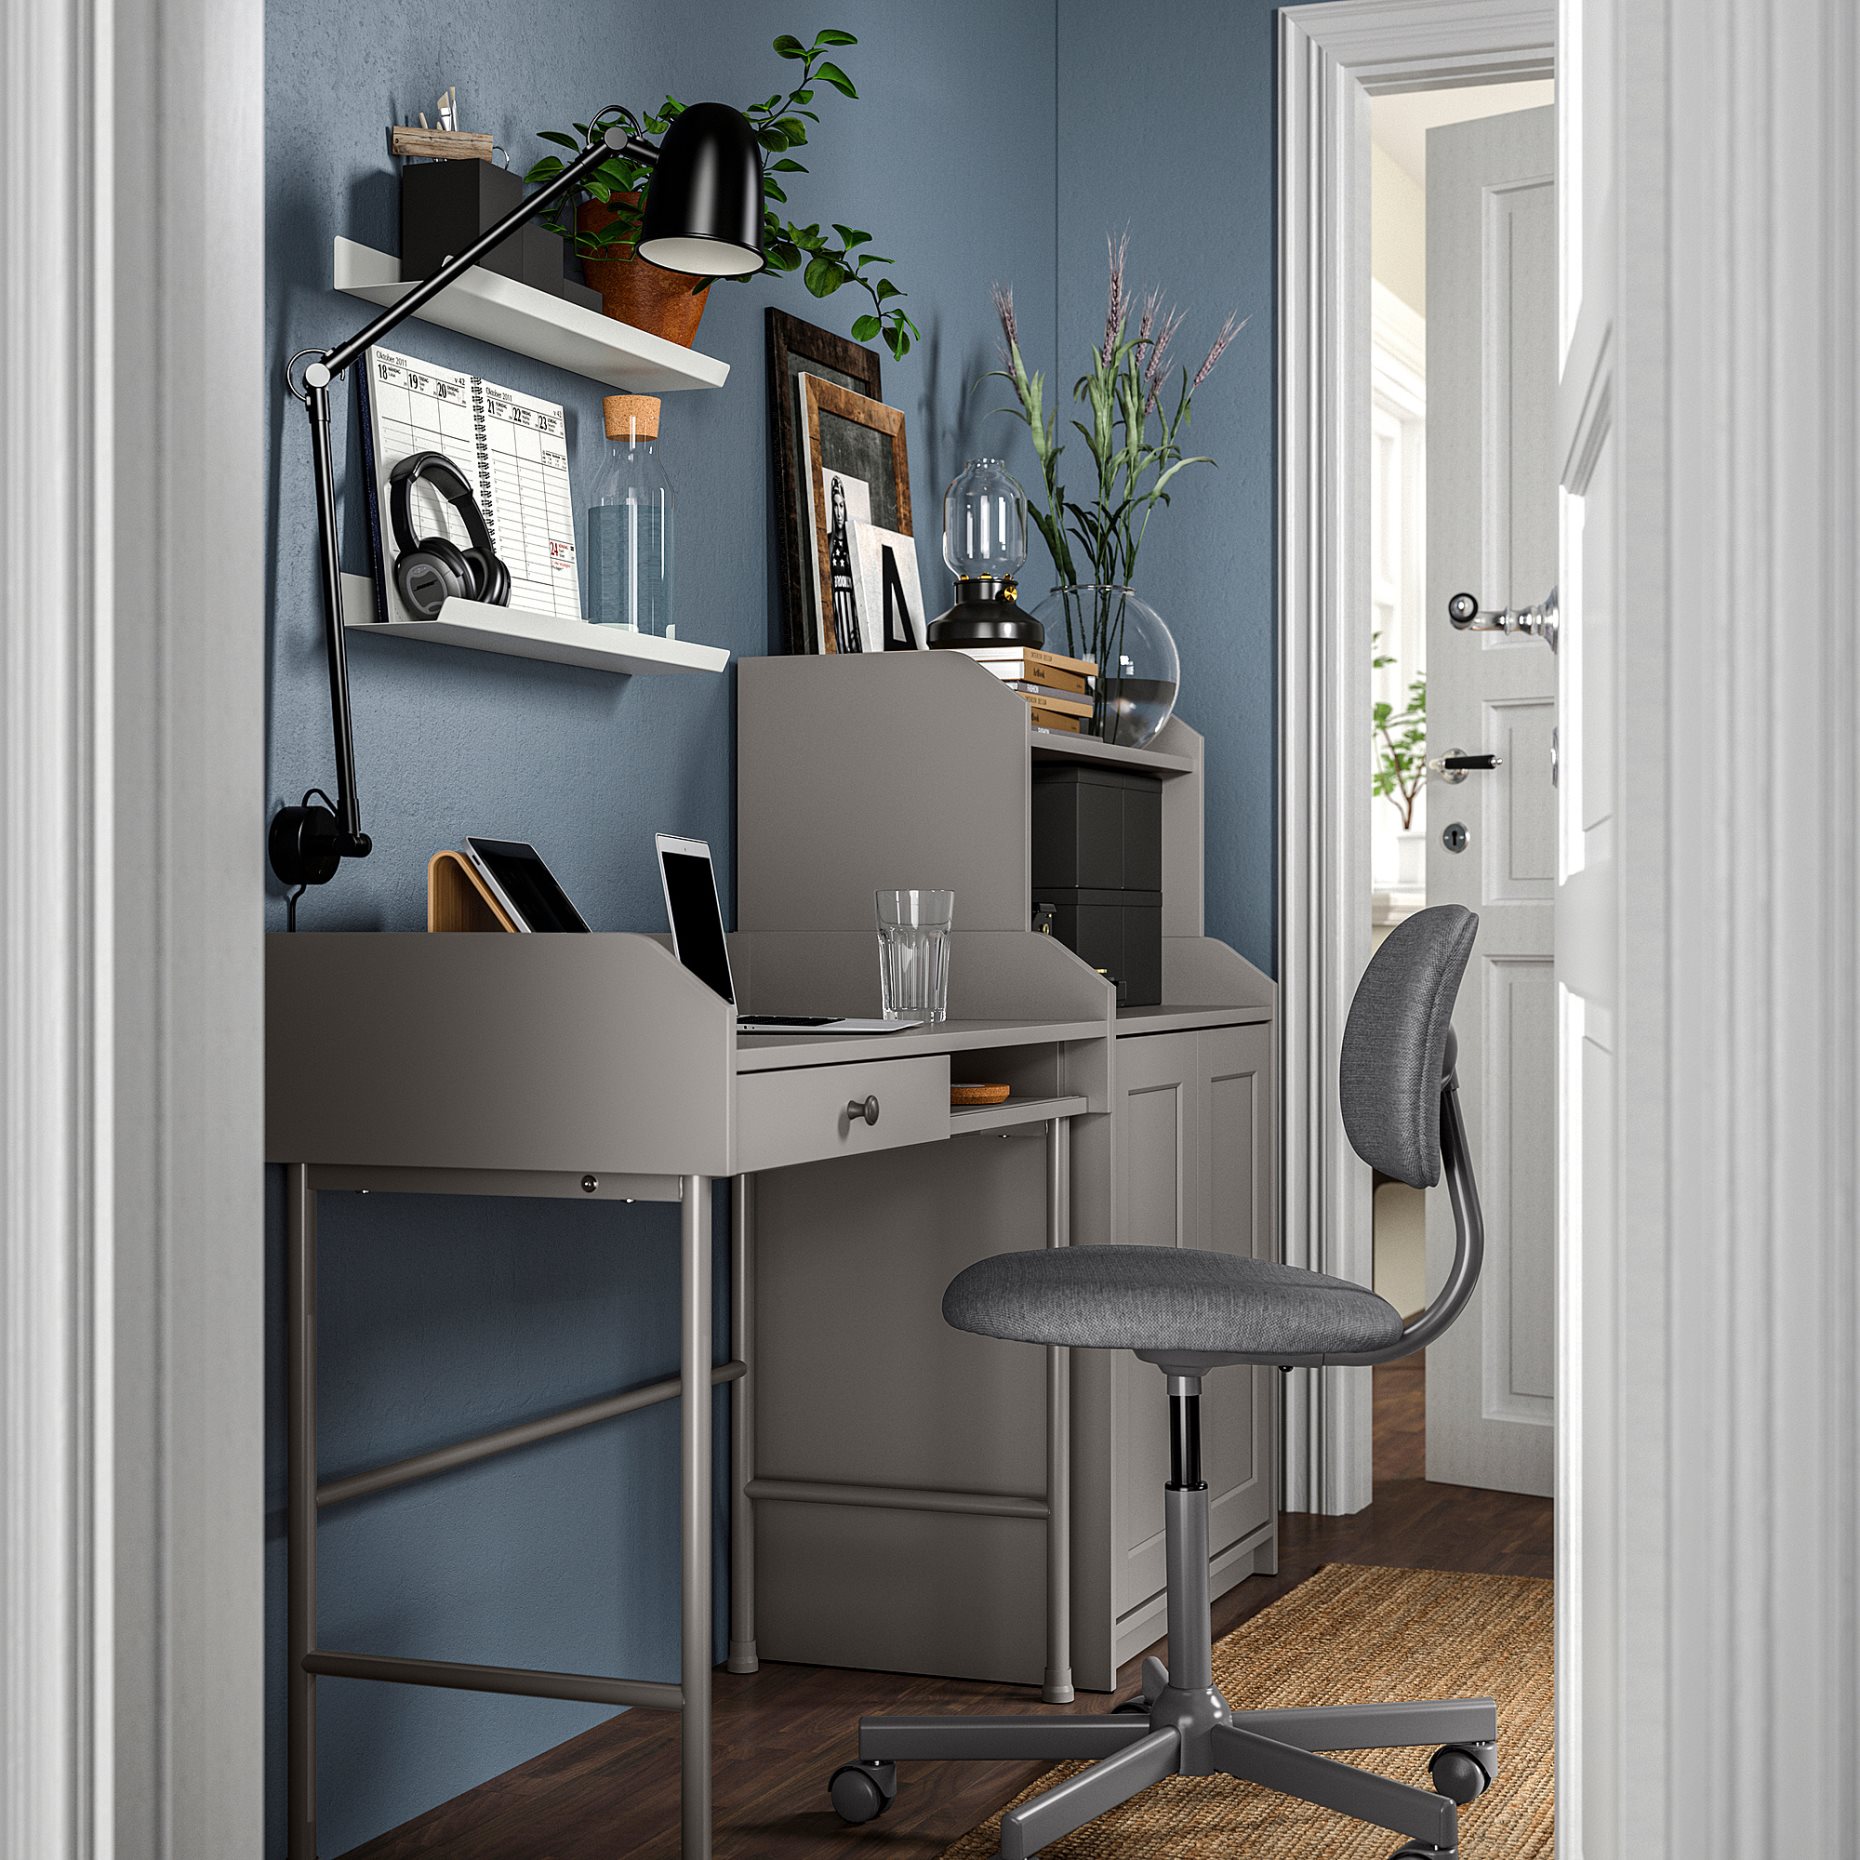 HAUGA/BLECKBERGET, desk and storage combination with swivel chair, 094.365.02